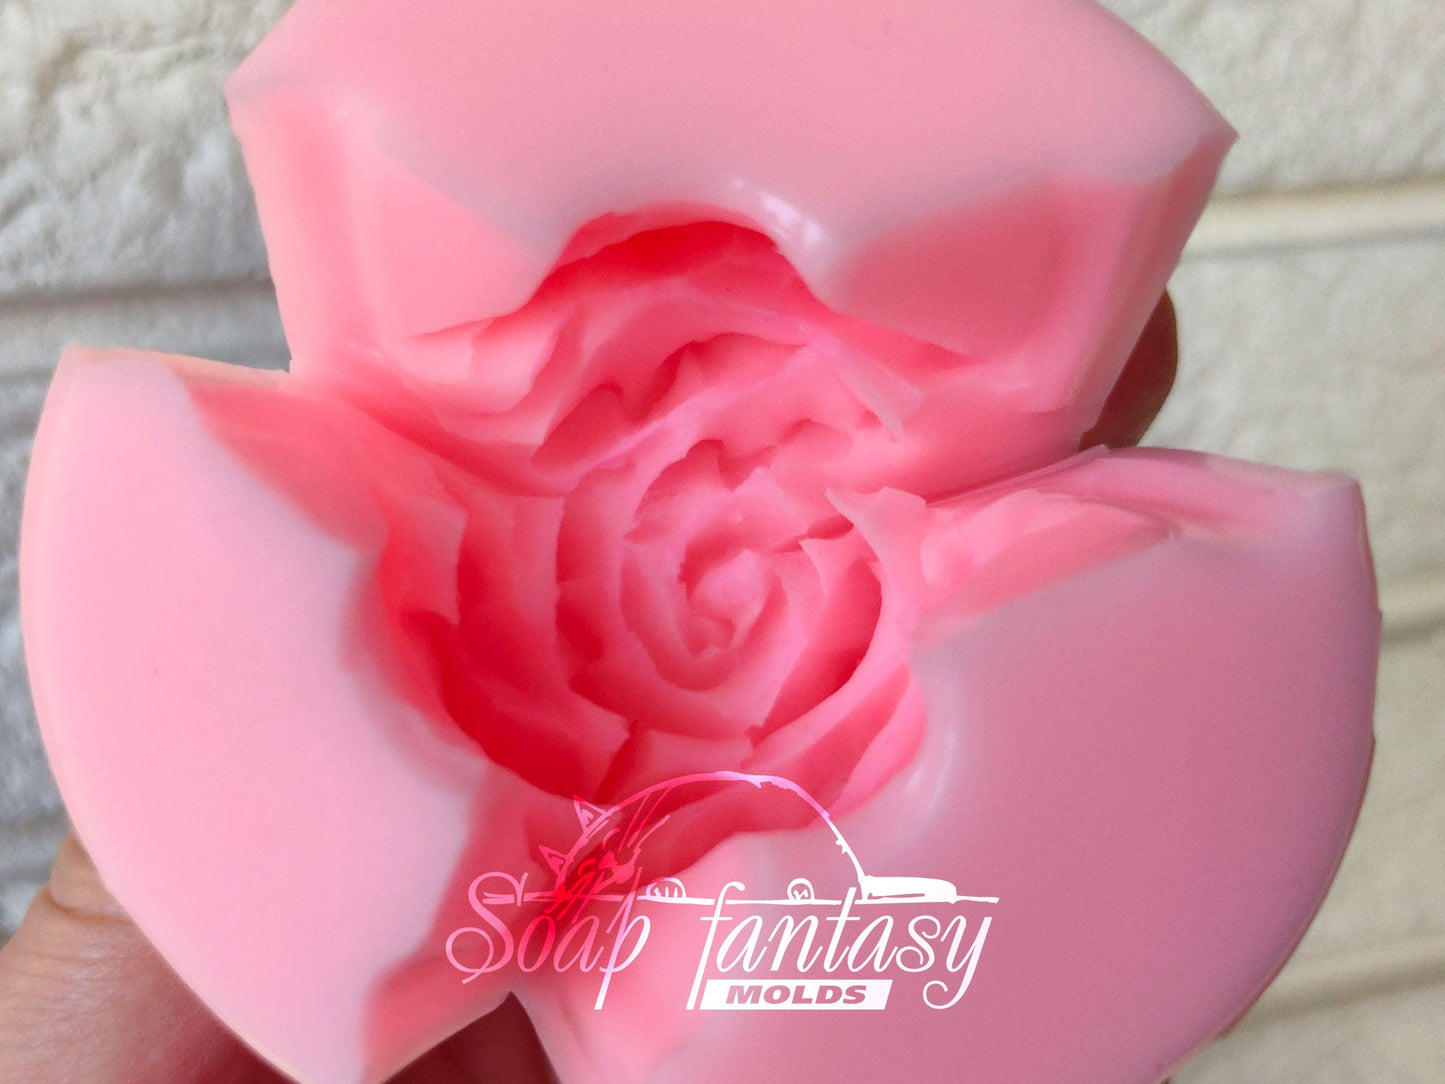 GARAGE SALE >> Carnation flower silicone mold for soap making